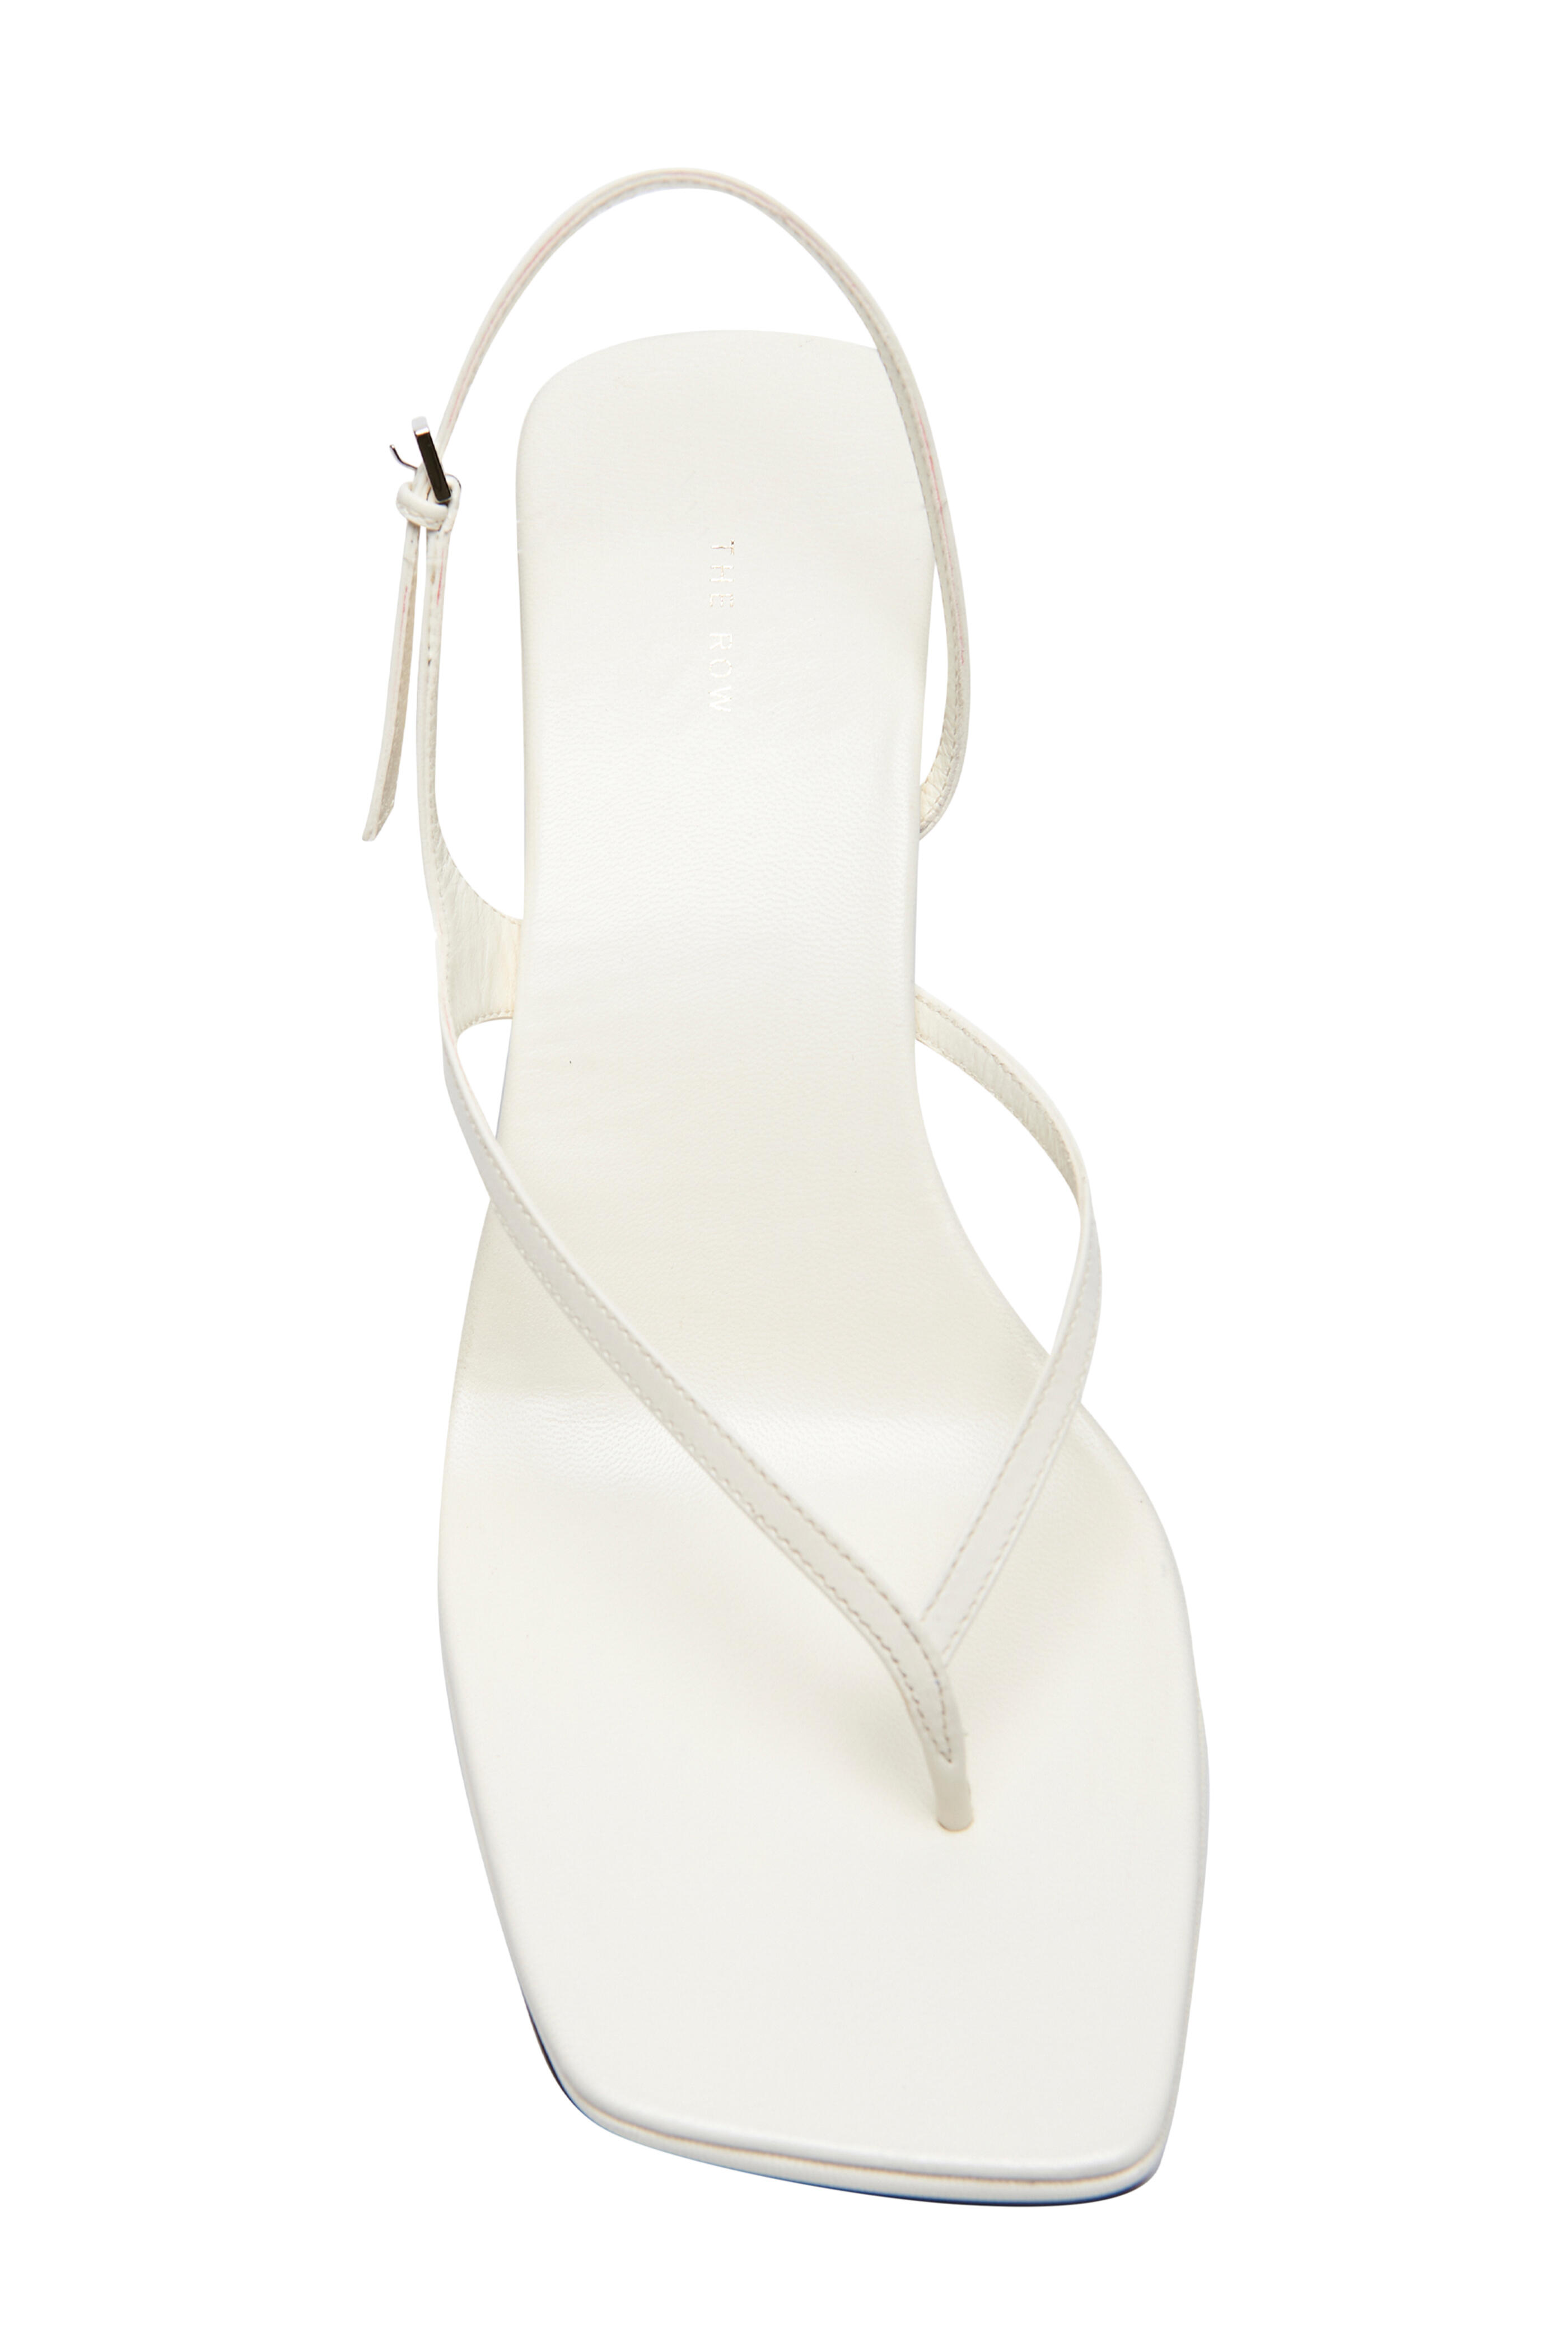 The Row - Constance White Leather Sandal, 55mm | Mitchell Stores